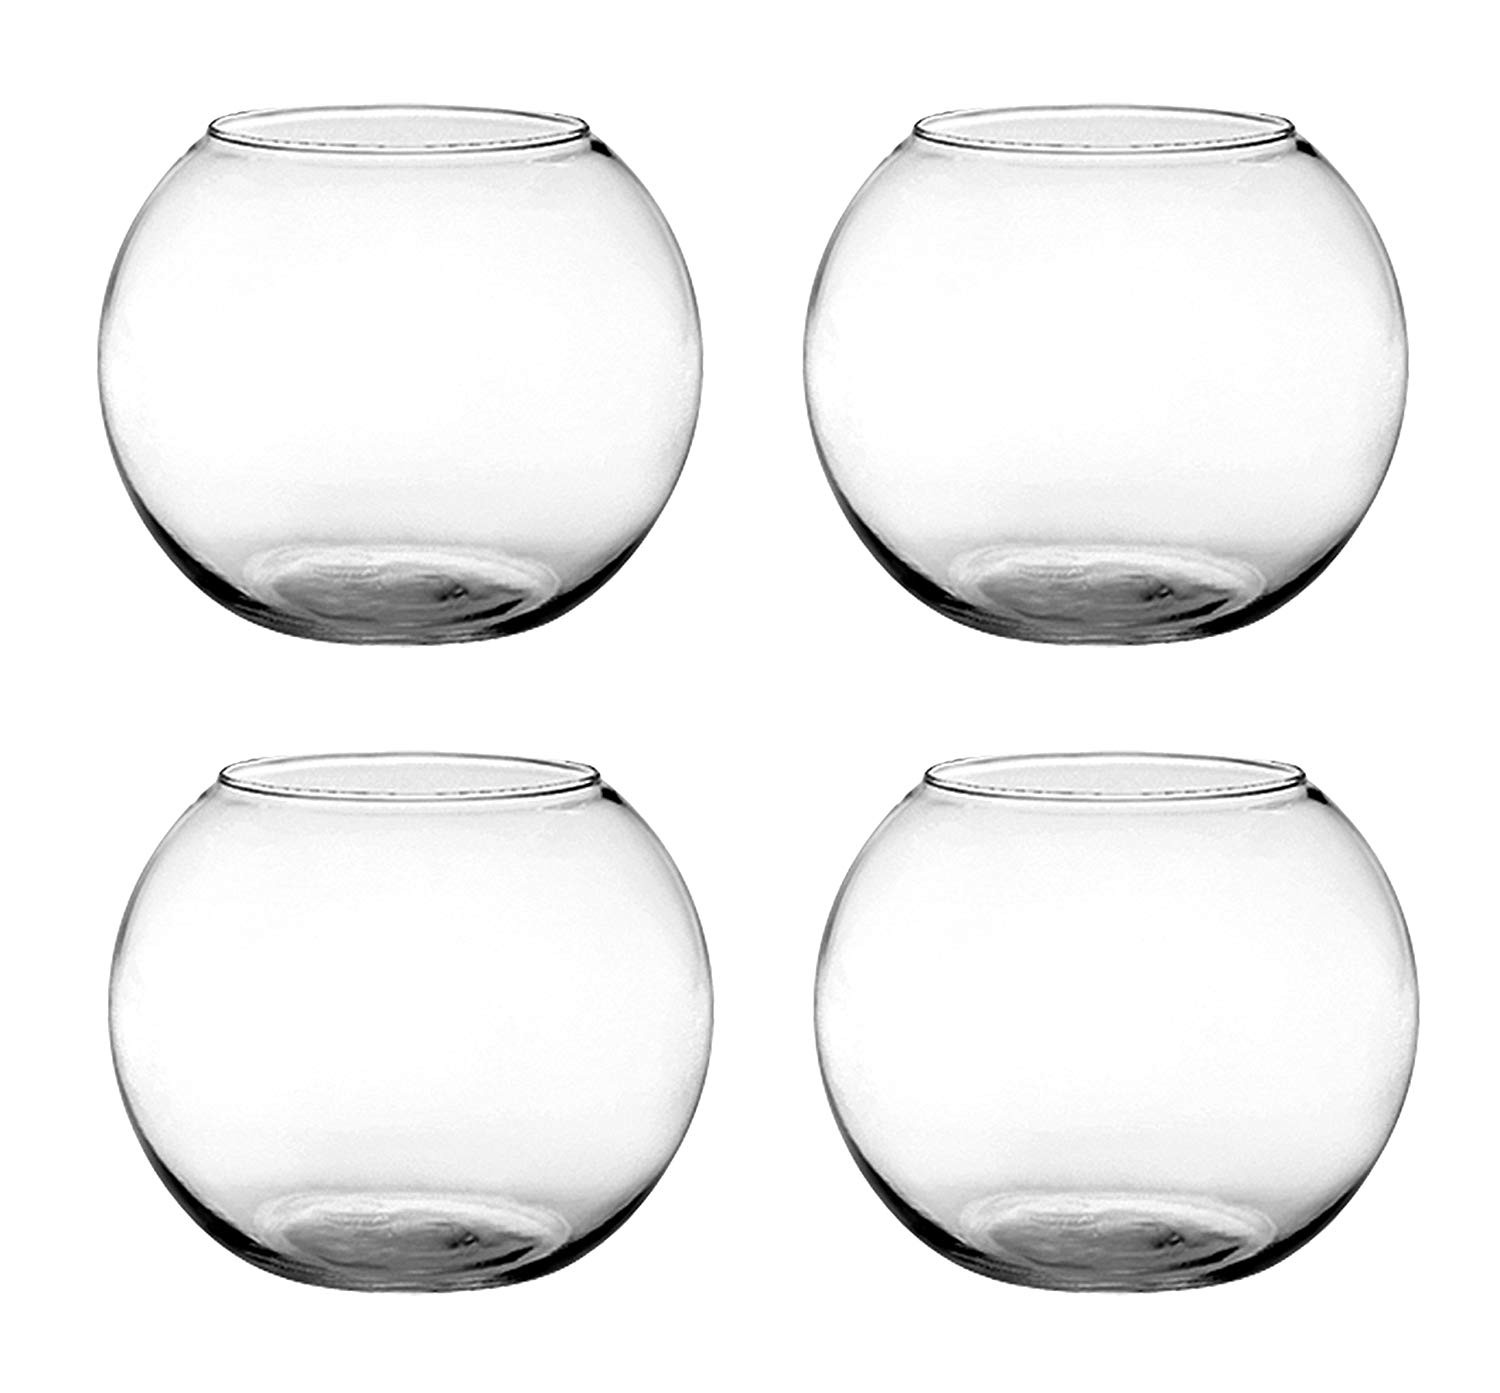 30 Best 24 Inch Clear Glass Vases 2024 free download 24 inch clear glass vases of amazon com set of 4 syndicate sales 6 inches clear rose bowl throughout amazon com set of 4 syndicate sales 6 inches clear rose bowl bundled by maven gifts garde